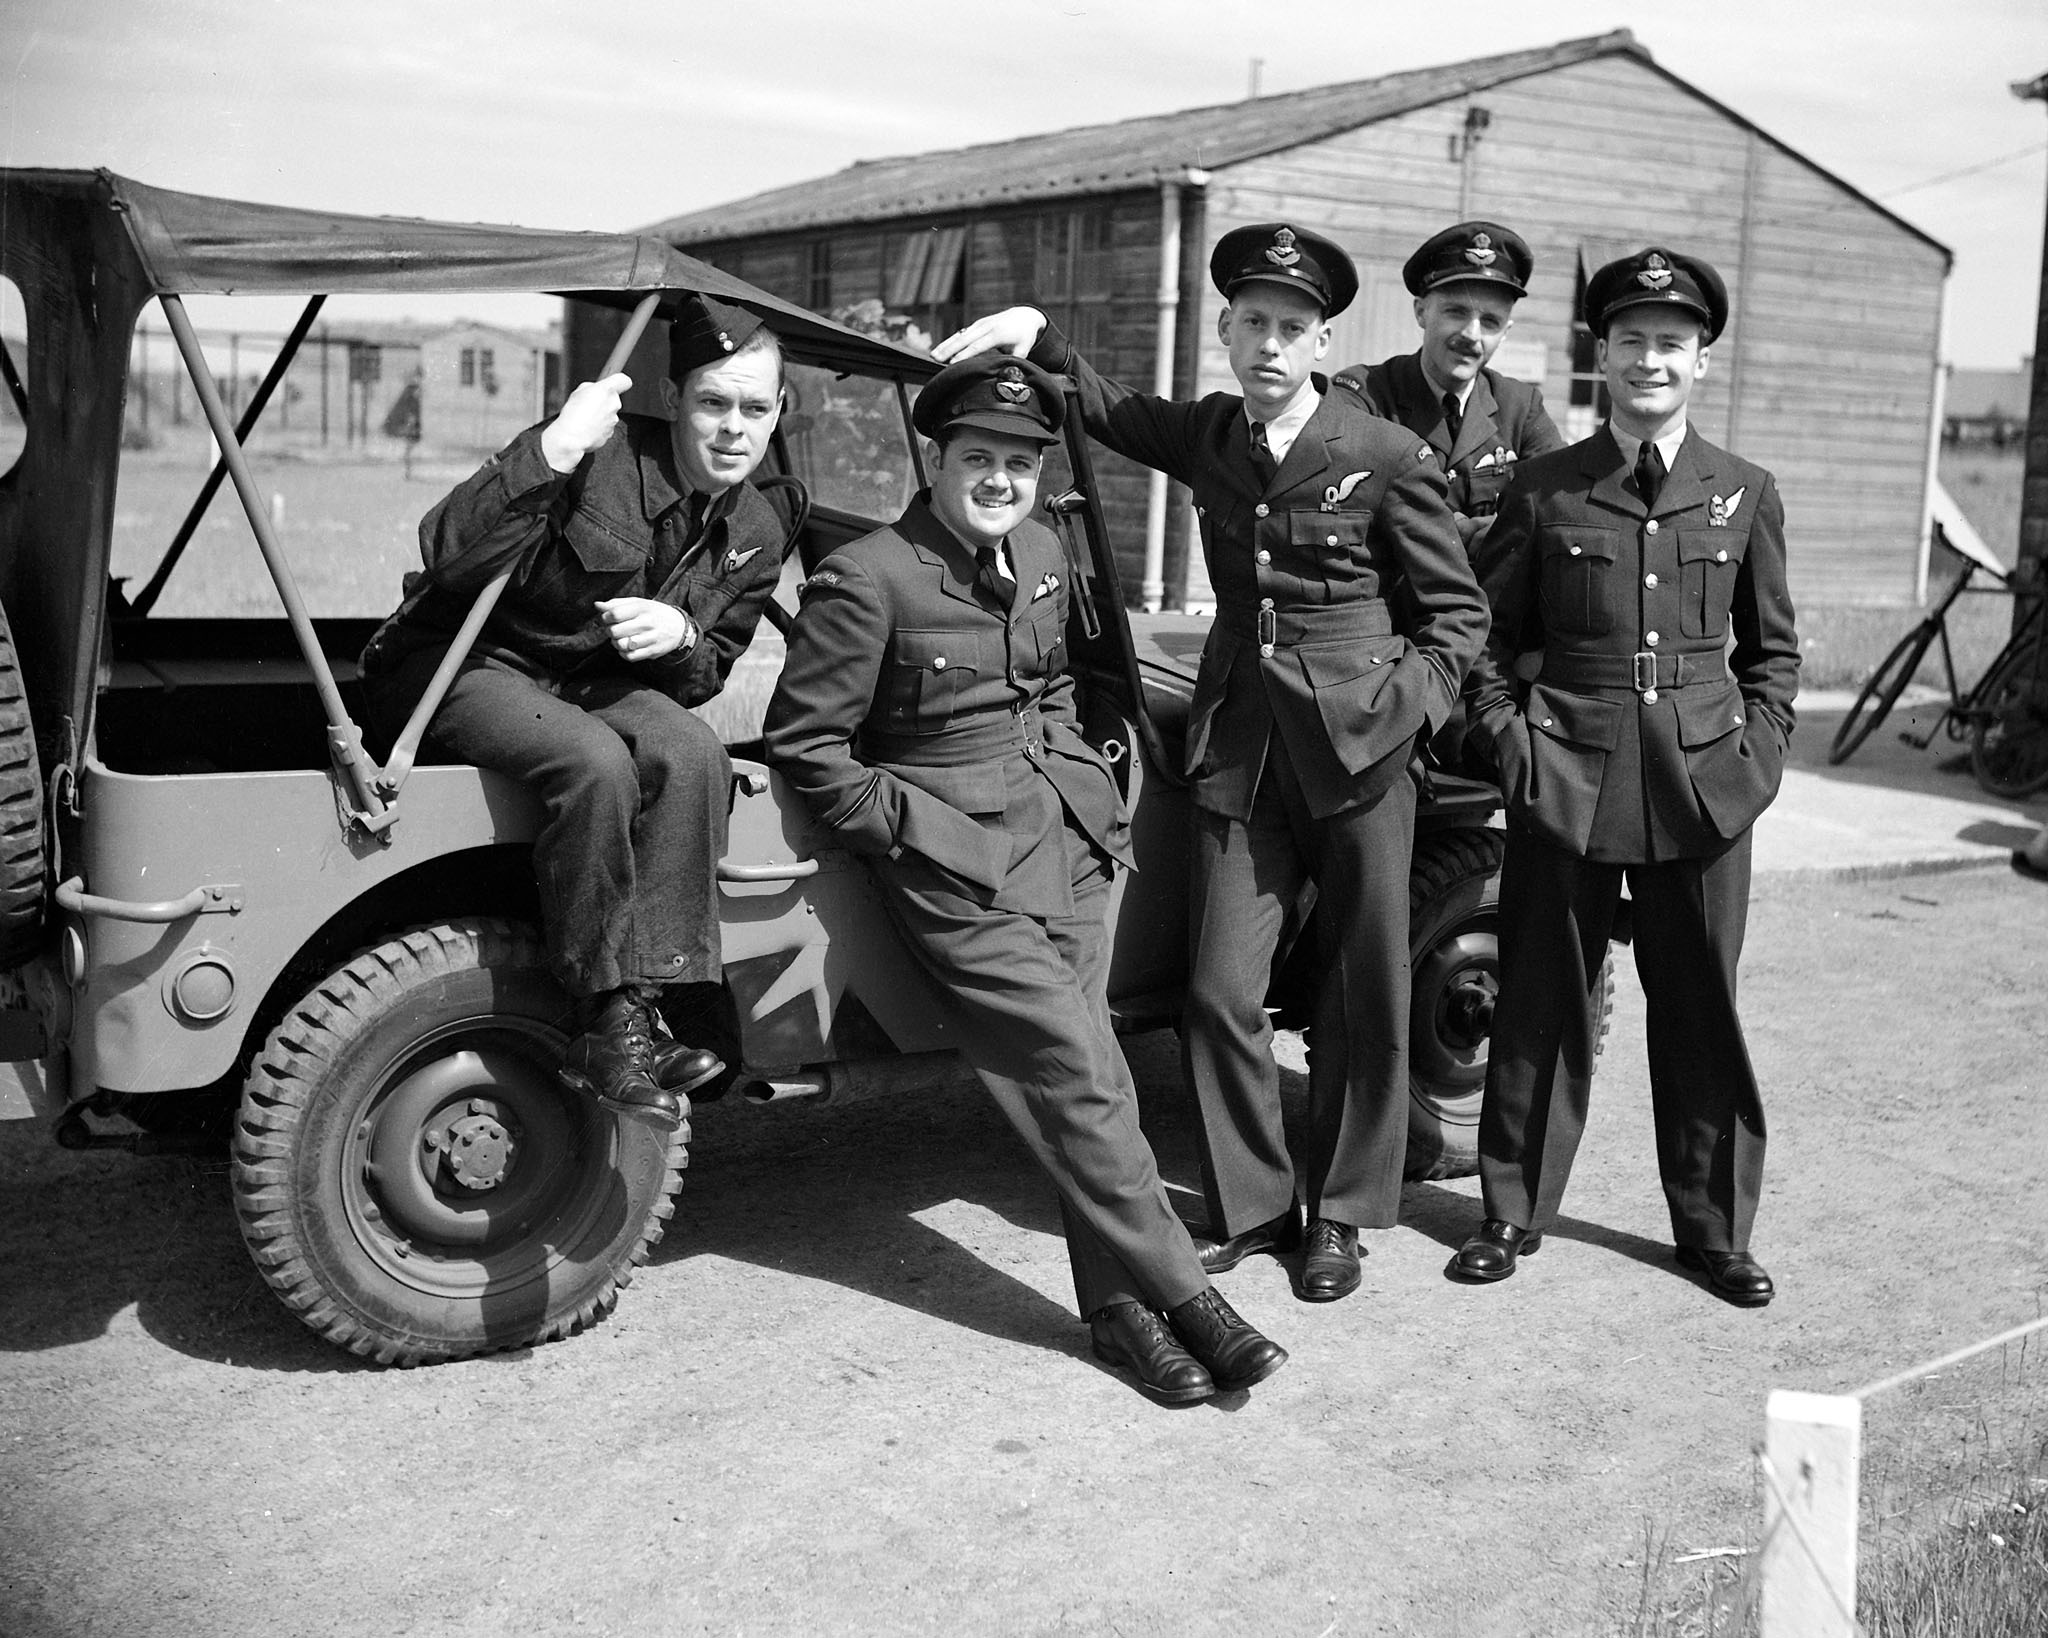 Some of the crew of a Canadian Canso flying boat “C for Charlie”, photographed in Iceland before setting out on anti-submarine patrol in the North Atlantic on January 22, 1944. From left to right: Sergeant Donald Scott, Packenham, Ontario; Flying Officer Bernard Denomy, Chatham, Ontario; Flying Officer Sydney Matheson, Nelson, British Columbia; Flight Lieutenant David Hornell, Mimico, Ontario; and Flying Officer Graham Campbell, Vancouver, British Columbia. PHOTO: DND Archives, PL-30826